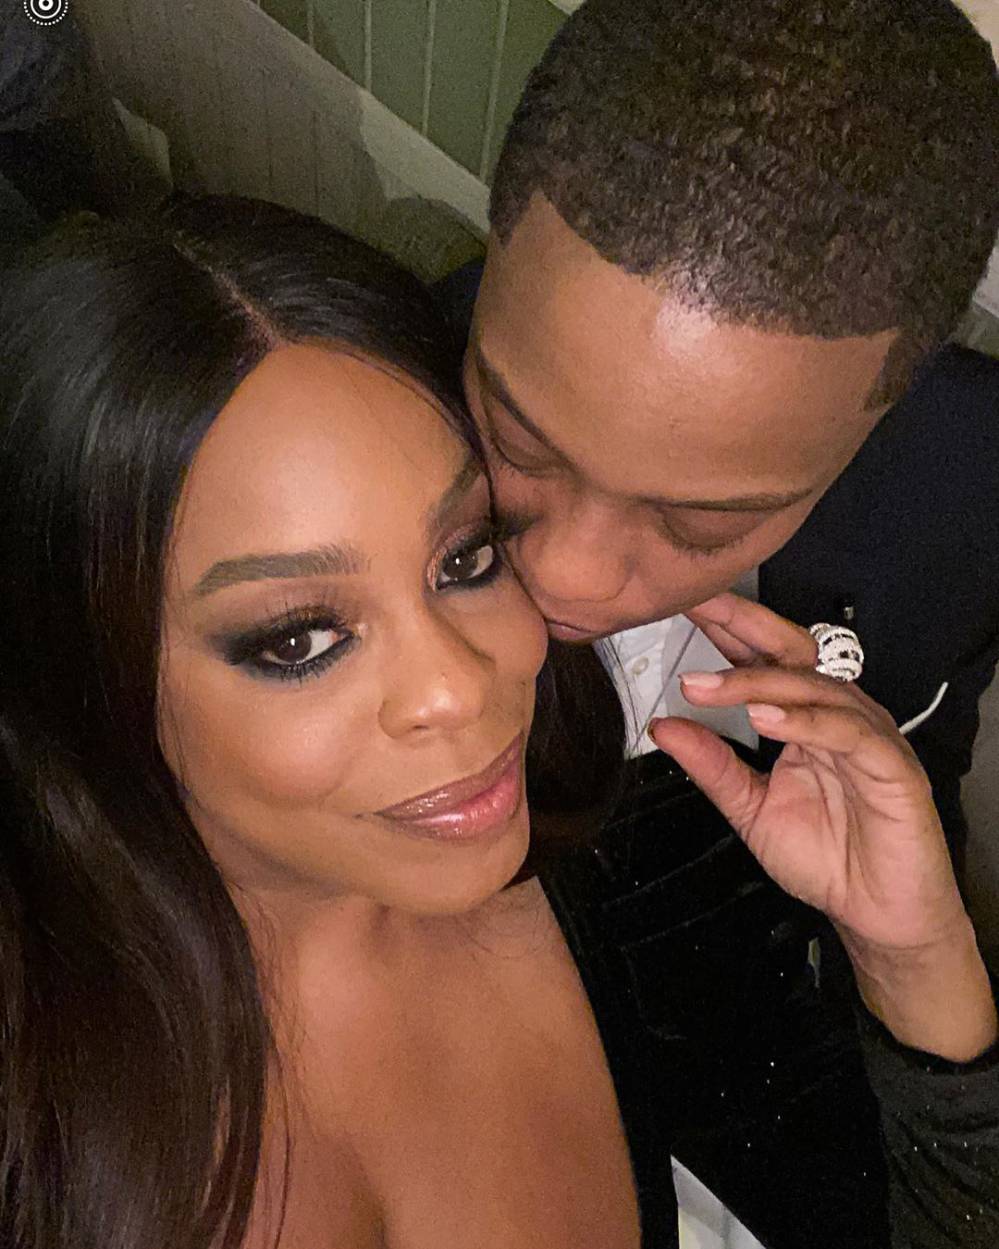 Niecy Nash Breaks Foot in 3 Places Weeks After Surprise Wedding to Singer Jessica Betts